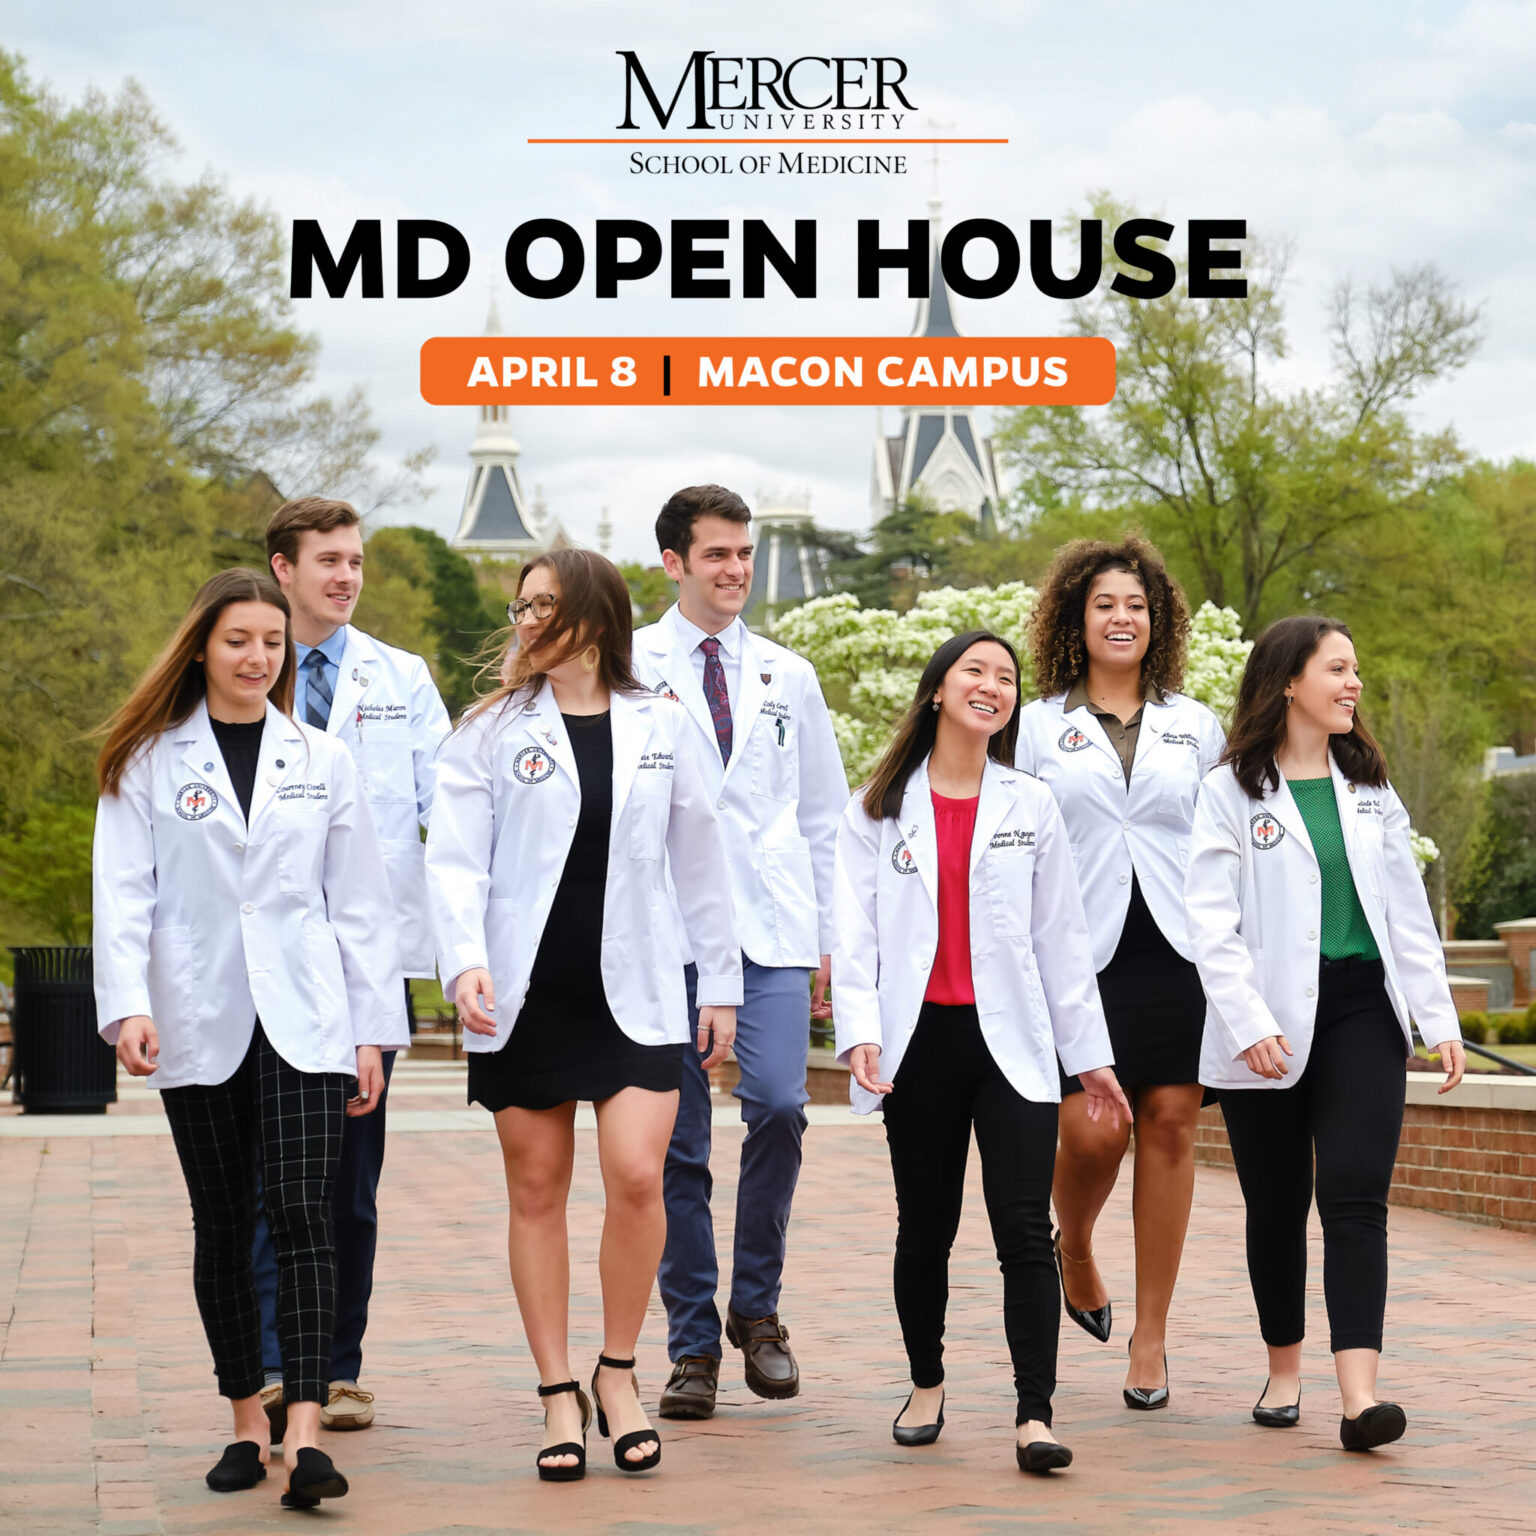 MD Open House Mercer Events